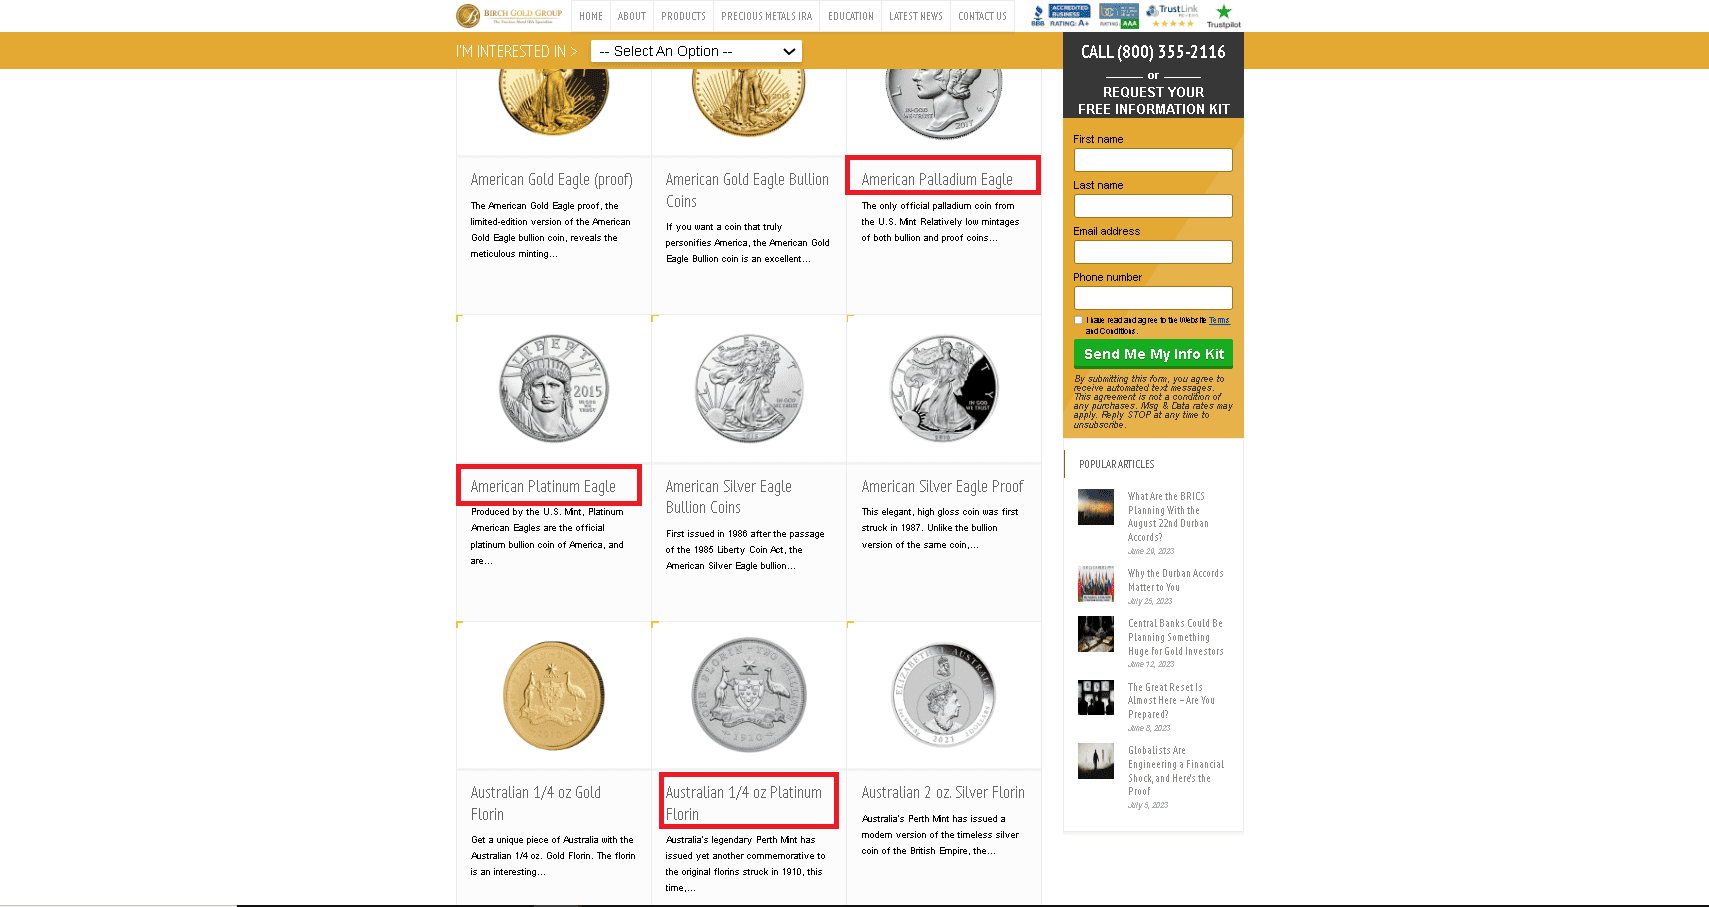 Birch Gold Group sell gold, silver, platinum and palladium coins and bars